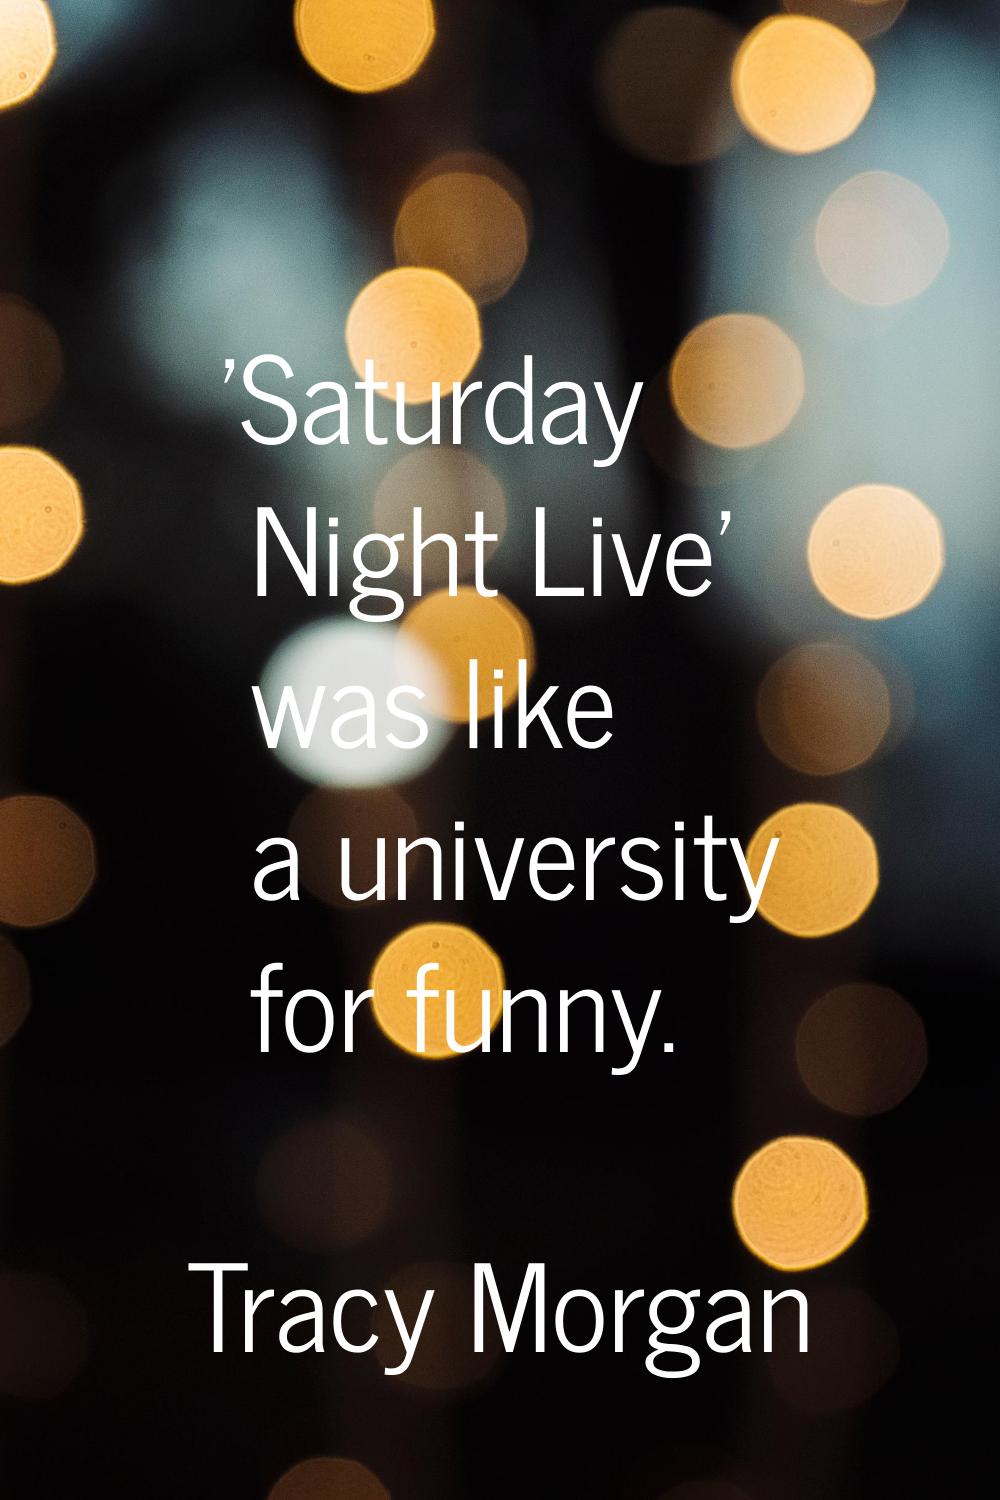 'Saturday Night Live' was like a university for funny.